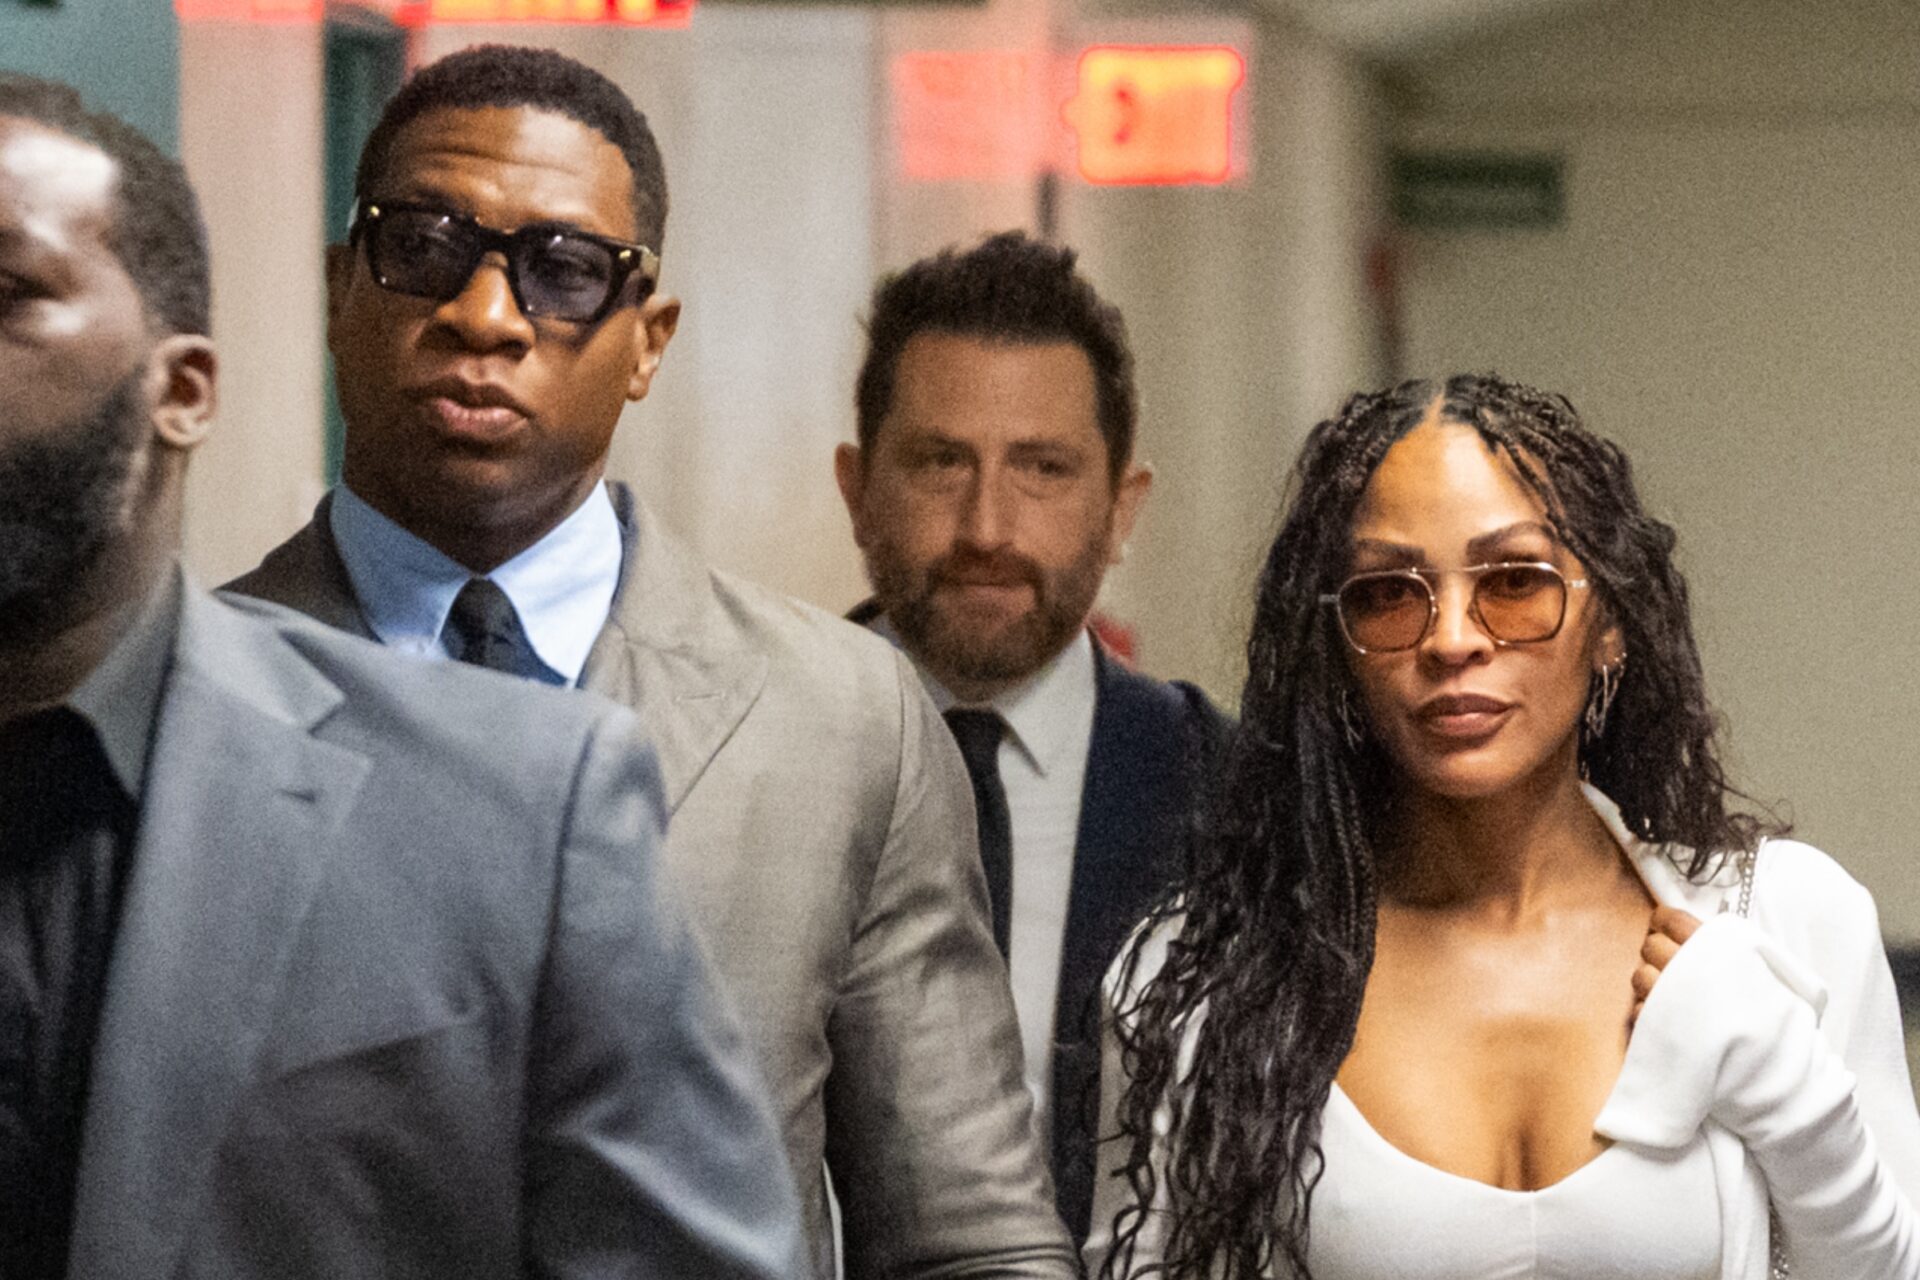 Jonathan Majors & Meagan Good Share An Emotional Moment During Defense Attorney’s Closing Statement